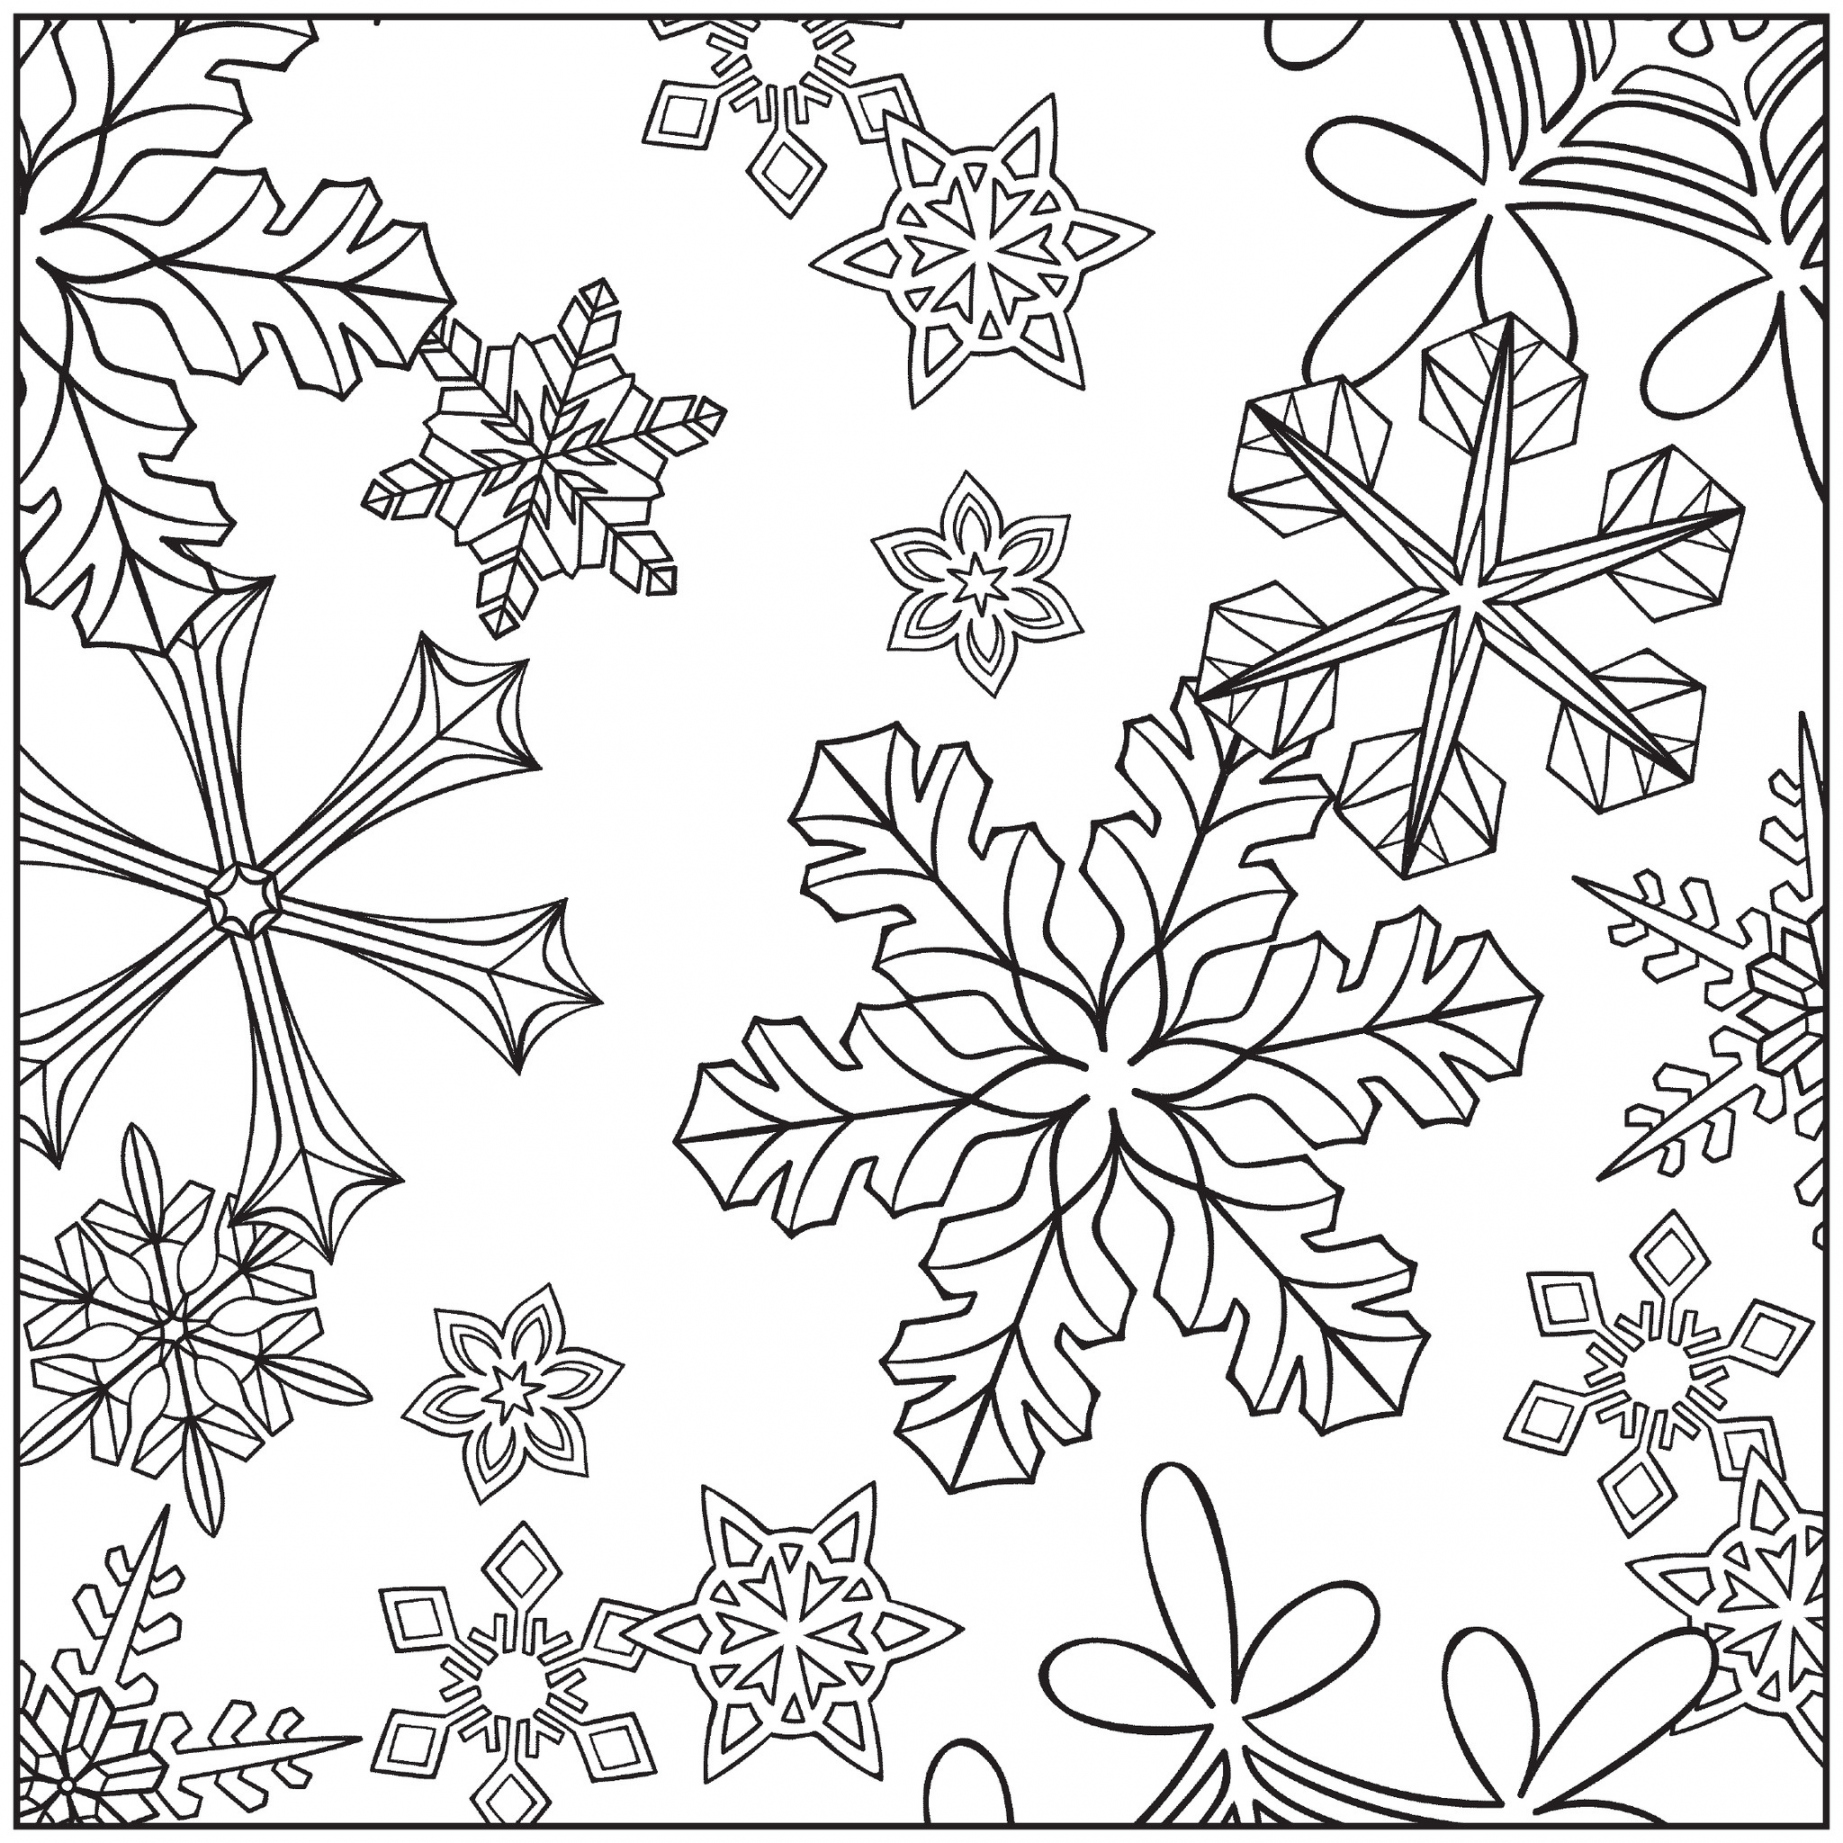 Free Printable Winter Coloring Pages For Kids - FREE Printables - Winter Coloring Pages Free Printable